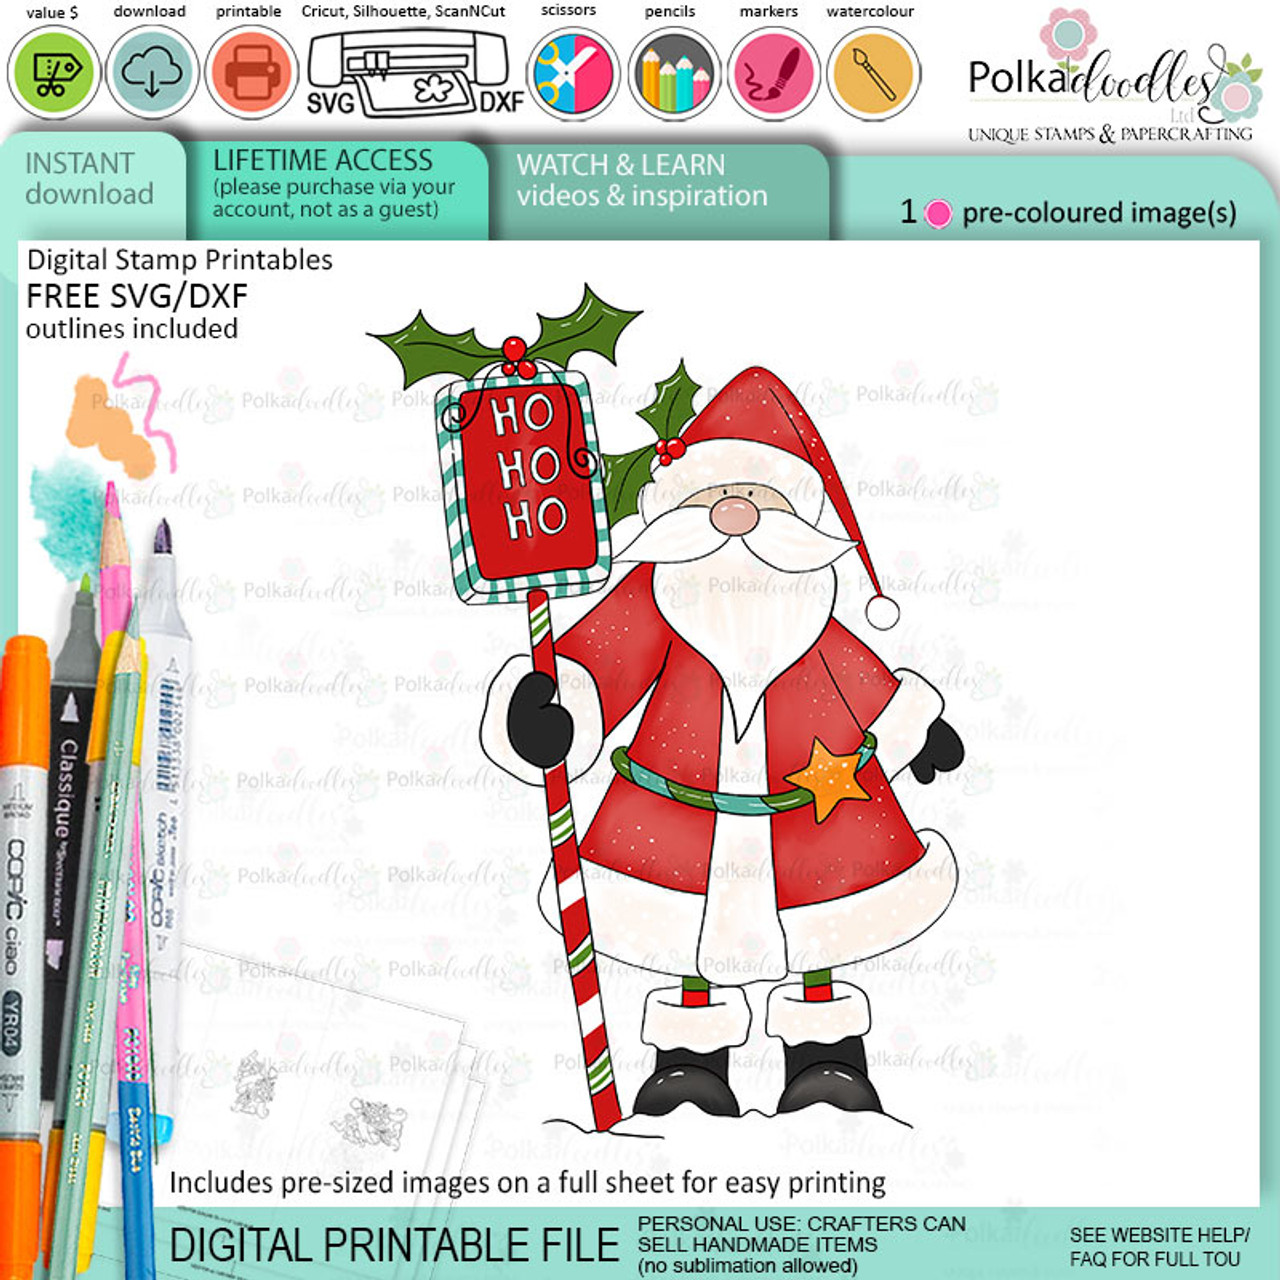 https://cdn11.bigcommerce.com/s-4xtiv/images/stencil/1280x1280/products/6913/39436/DLPD9548-santa-hohoho-c-christmas-holiday-printable-stamp-craft-card-making-scrapbook-sticker-__17464.1700231609.jpg?c=2